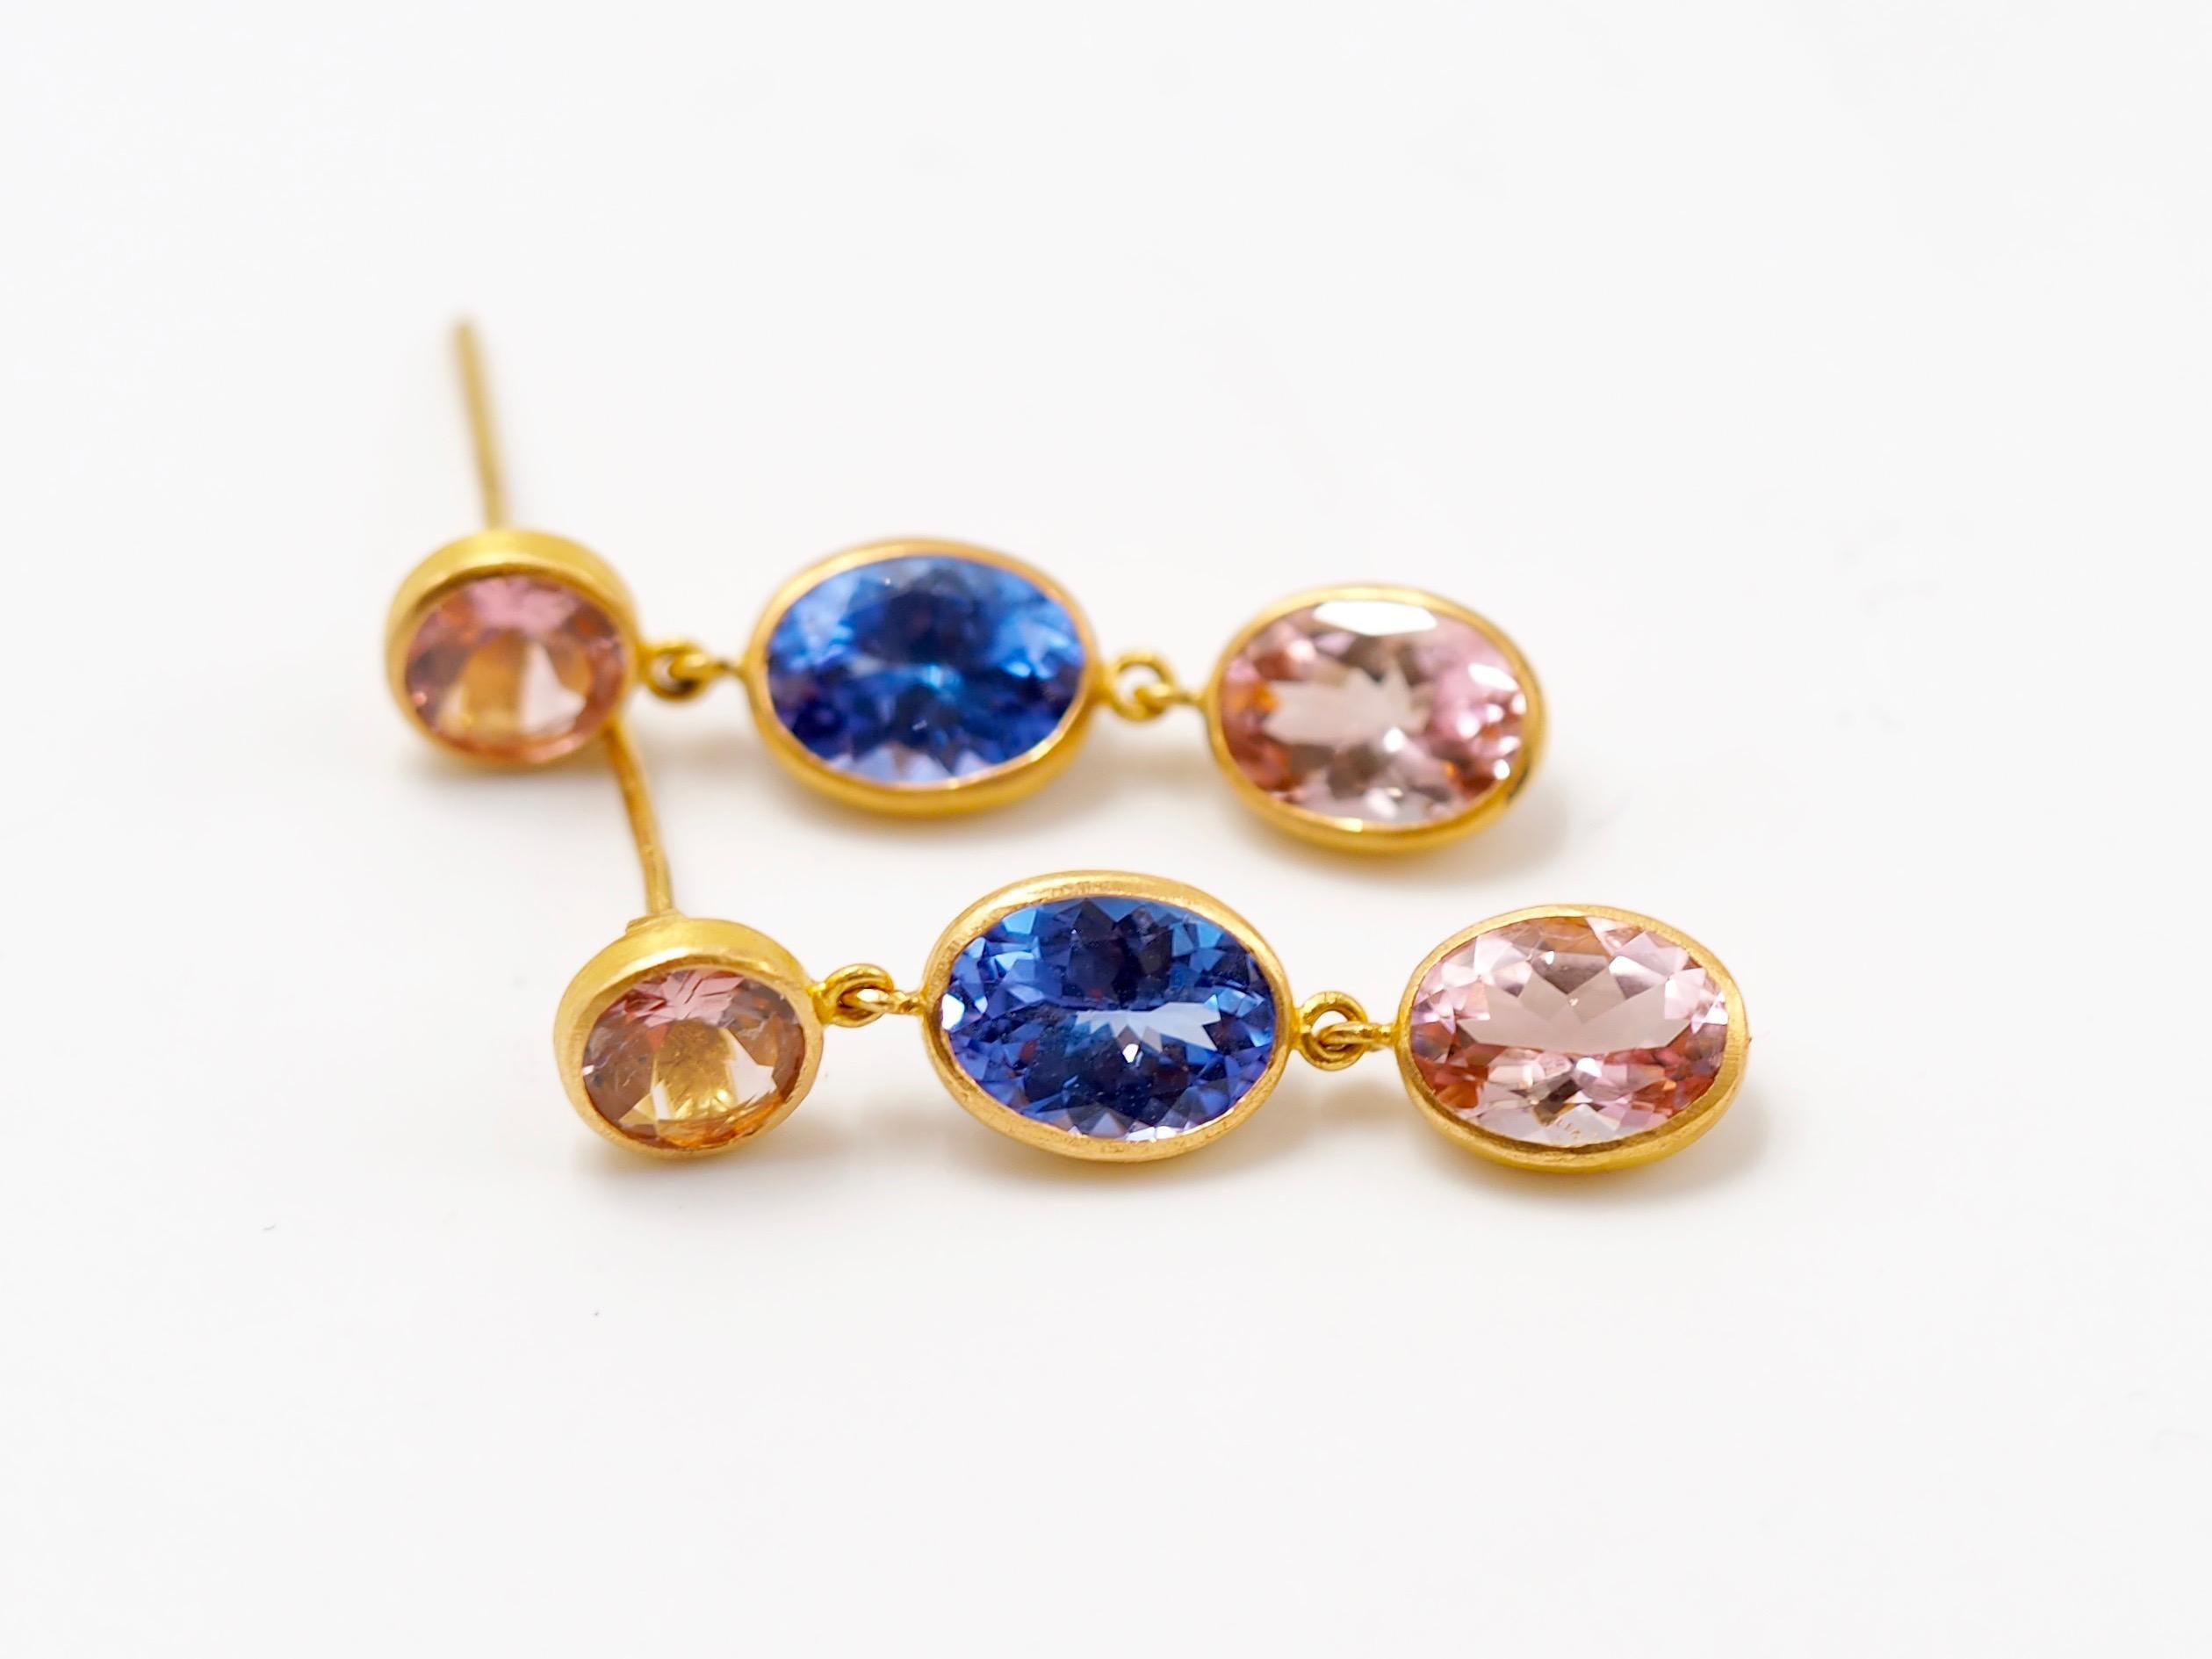 These colourful earrings by Scrives are composed of 4 light pink tourmalines (2 rounds & 2 ovales) & 2 oval tanzanites.
Tourmalines & morganites total weight is 6.68 cts. 
The tourmalines and tanzanites are high quality gemstones with very good